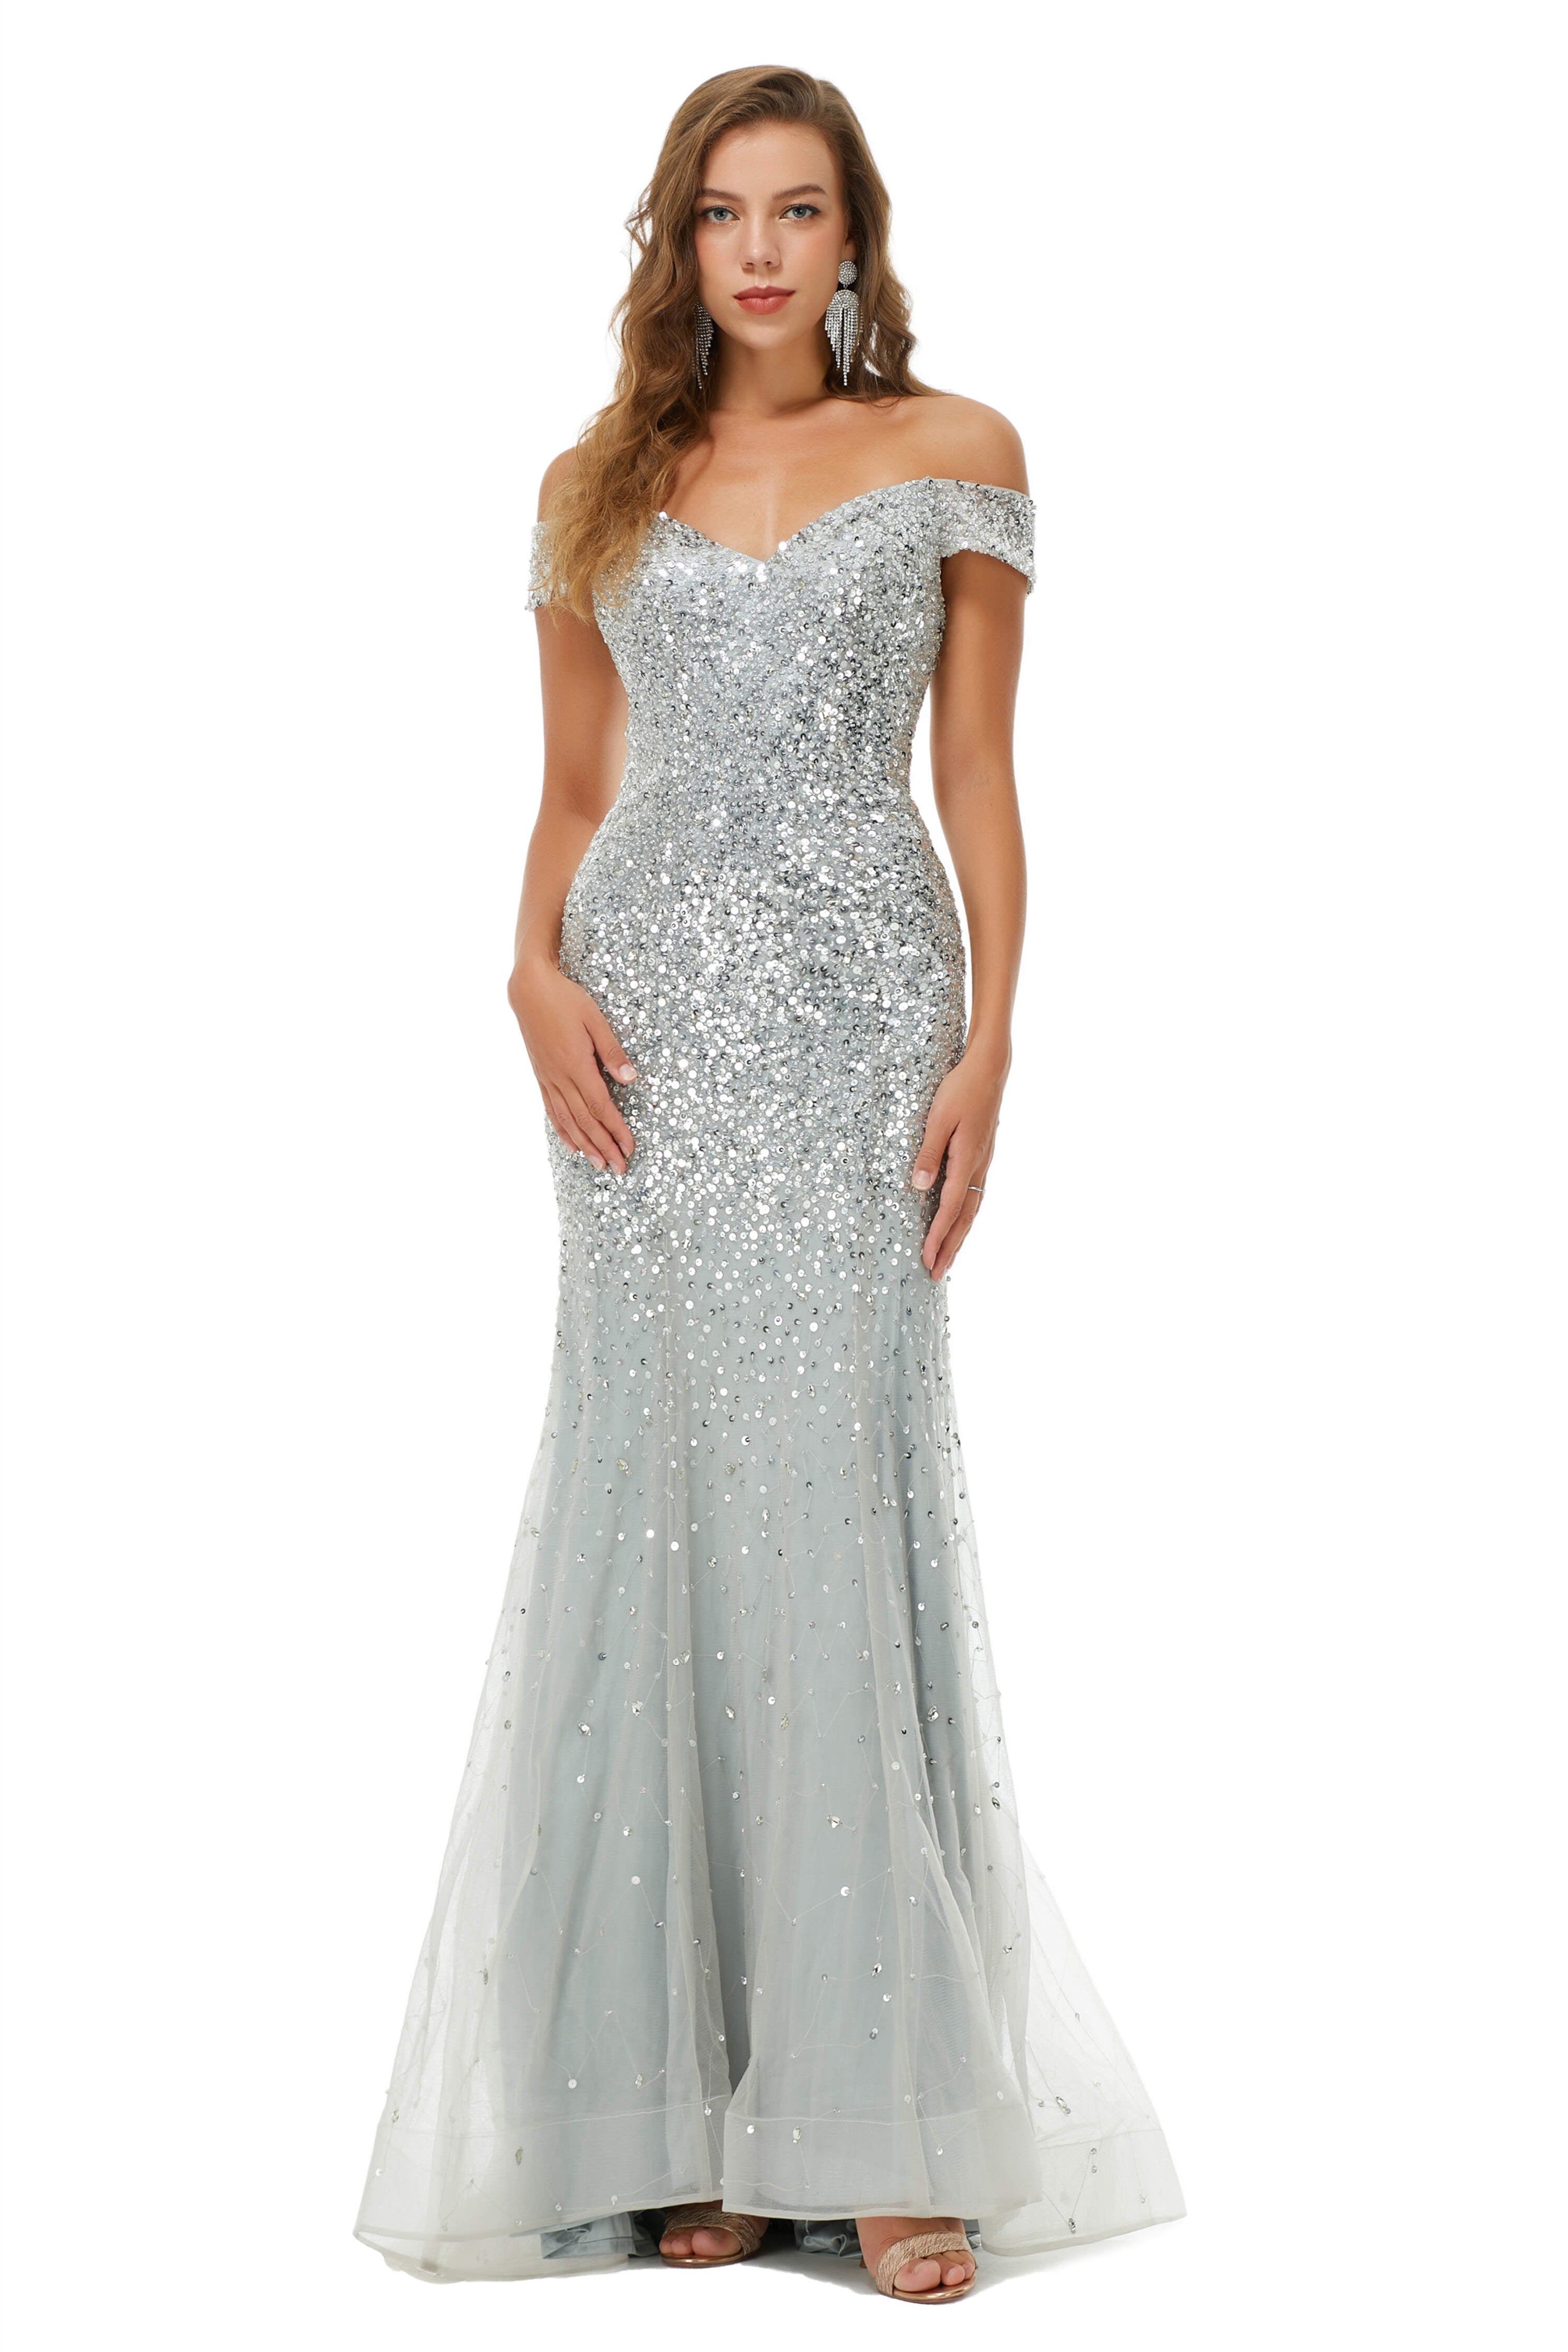 Evening Dresses Black, Sparkle Silver Mermaid Beaded Cap Sleeves Off-The-Shoulder Prom Dresses